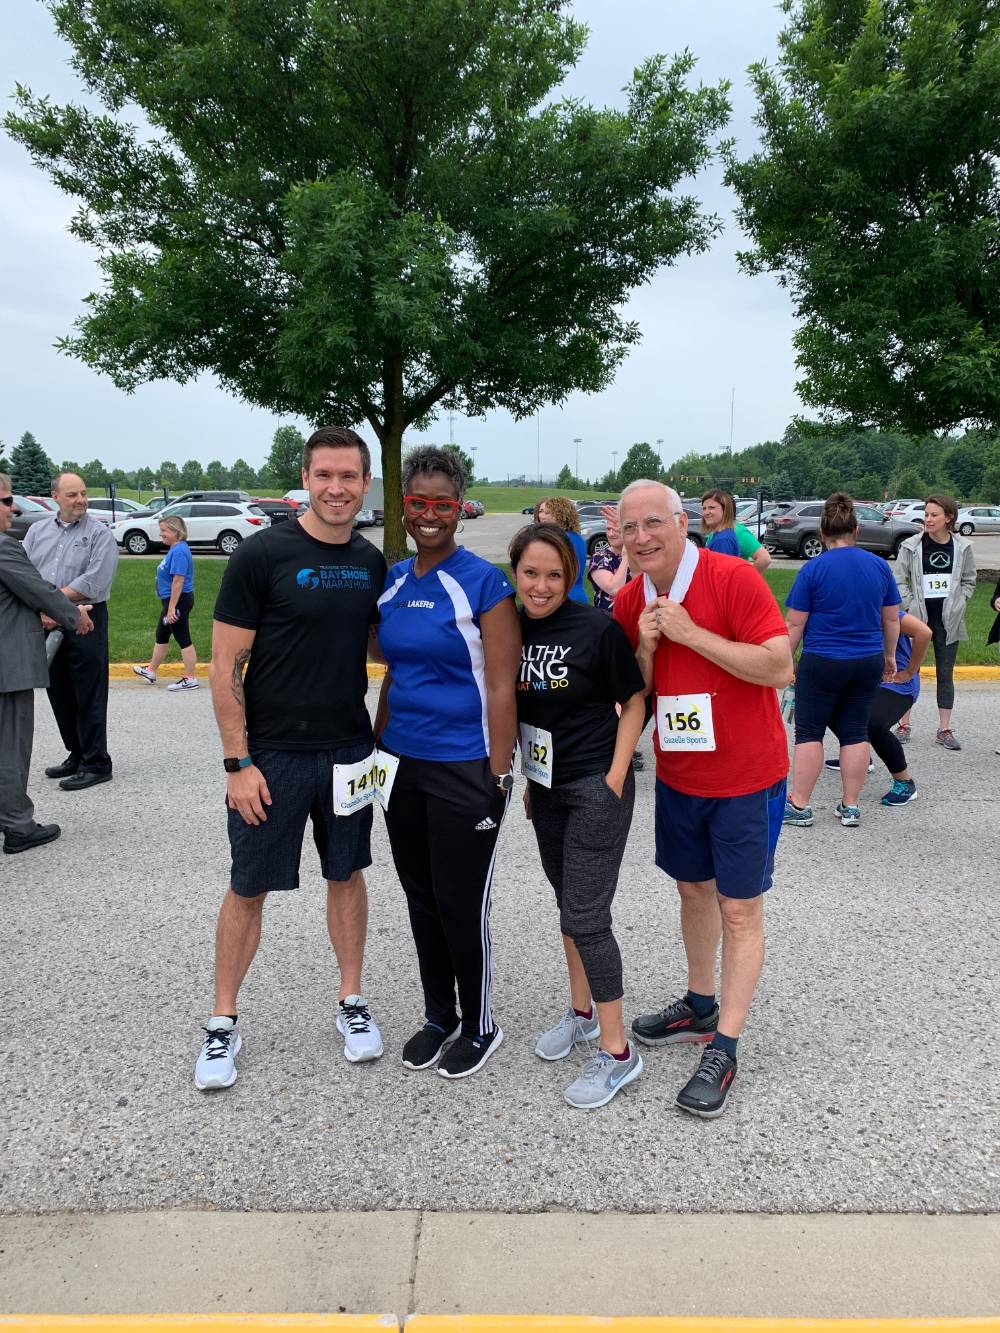 Adam MacRae, Tara Bivens, Elisa Salazar and Dave Smith standing together and smiling before the race